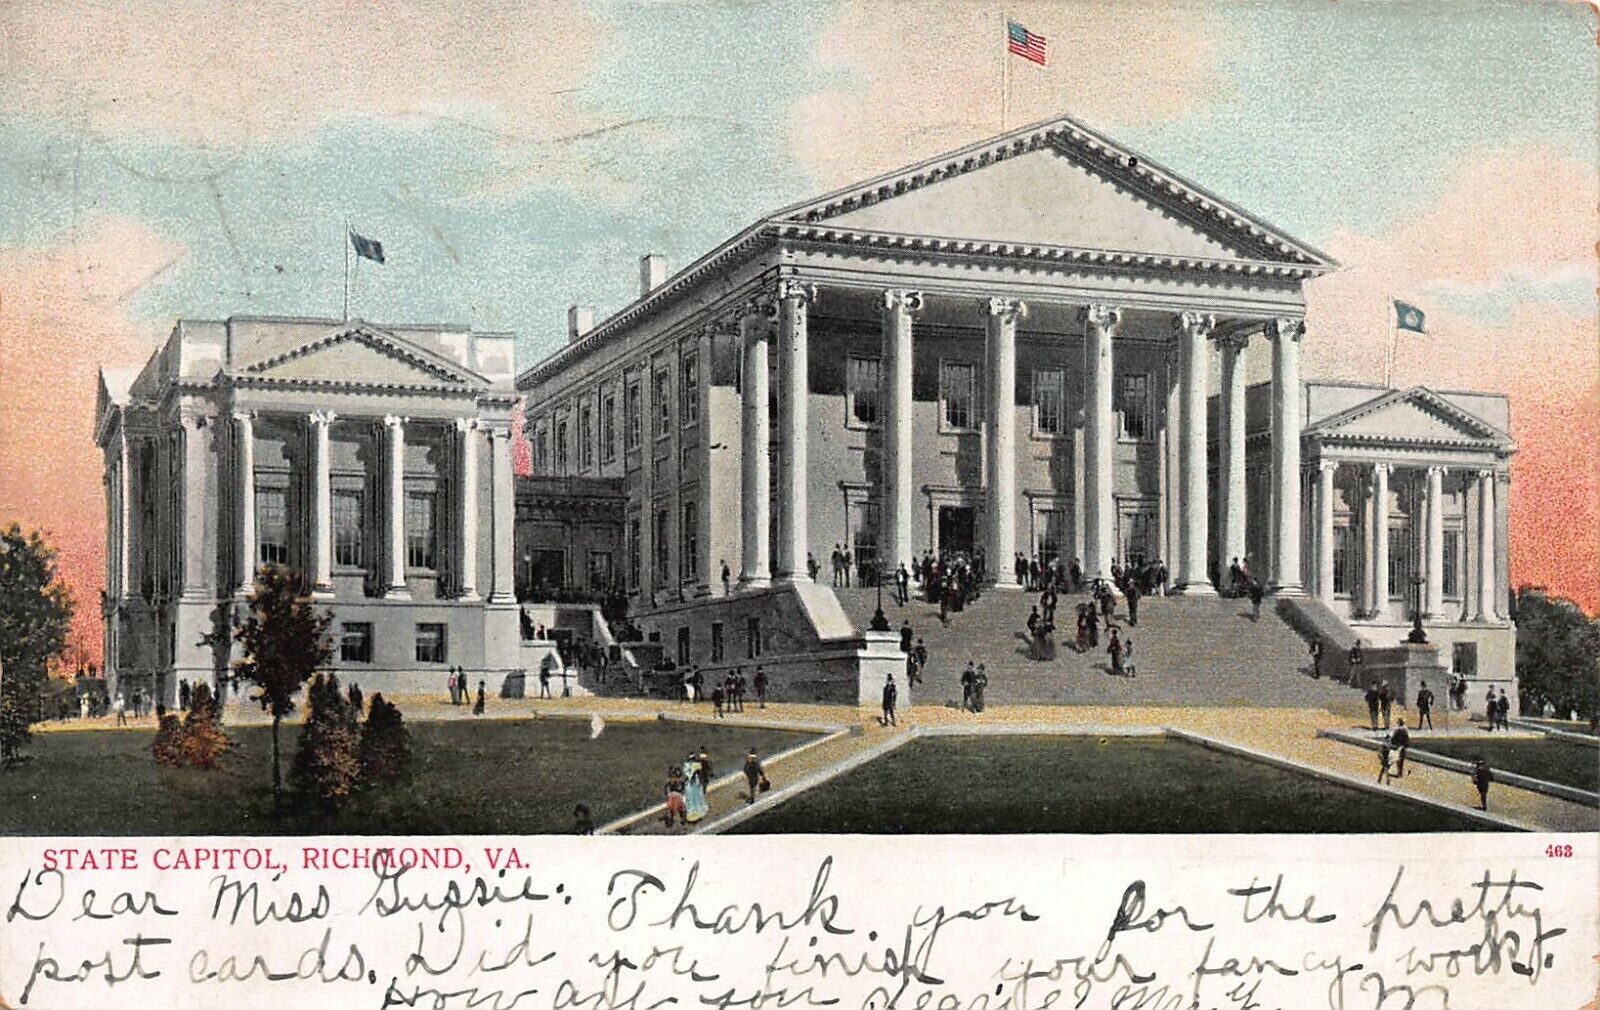 State Capitol, Richmond, Virginia, Early Postcard, Used in 1906